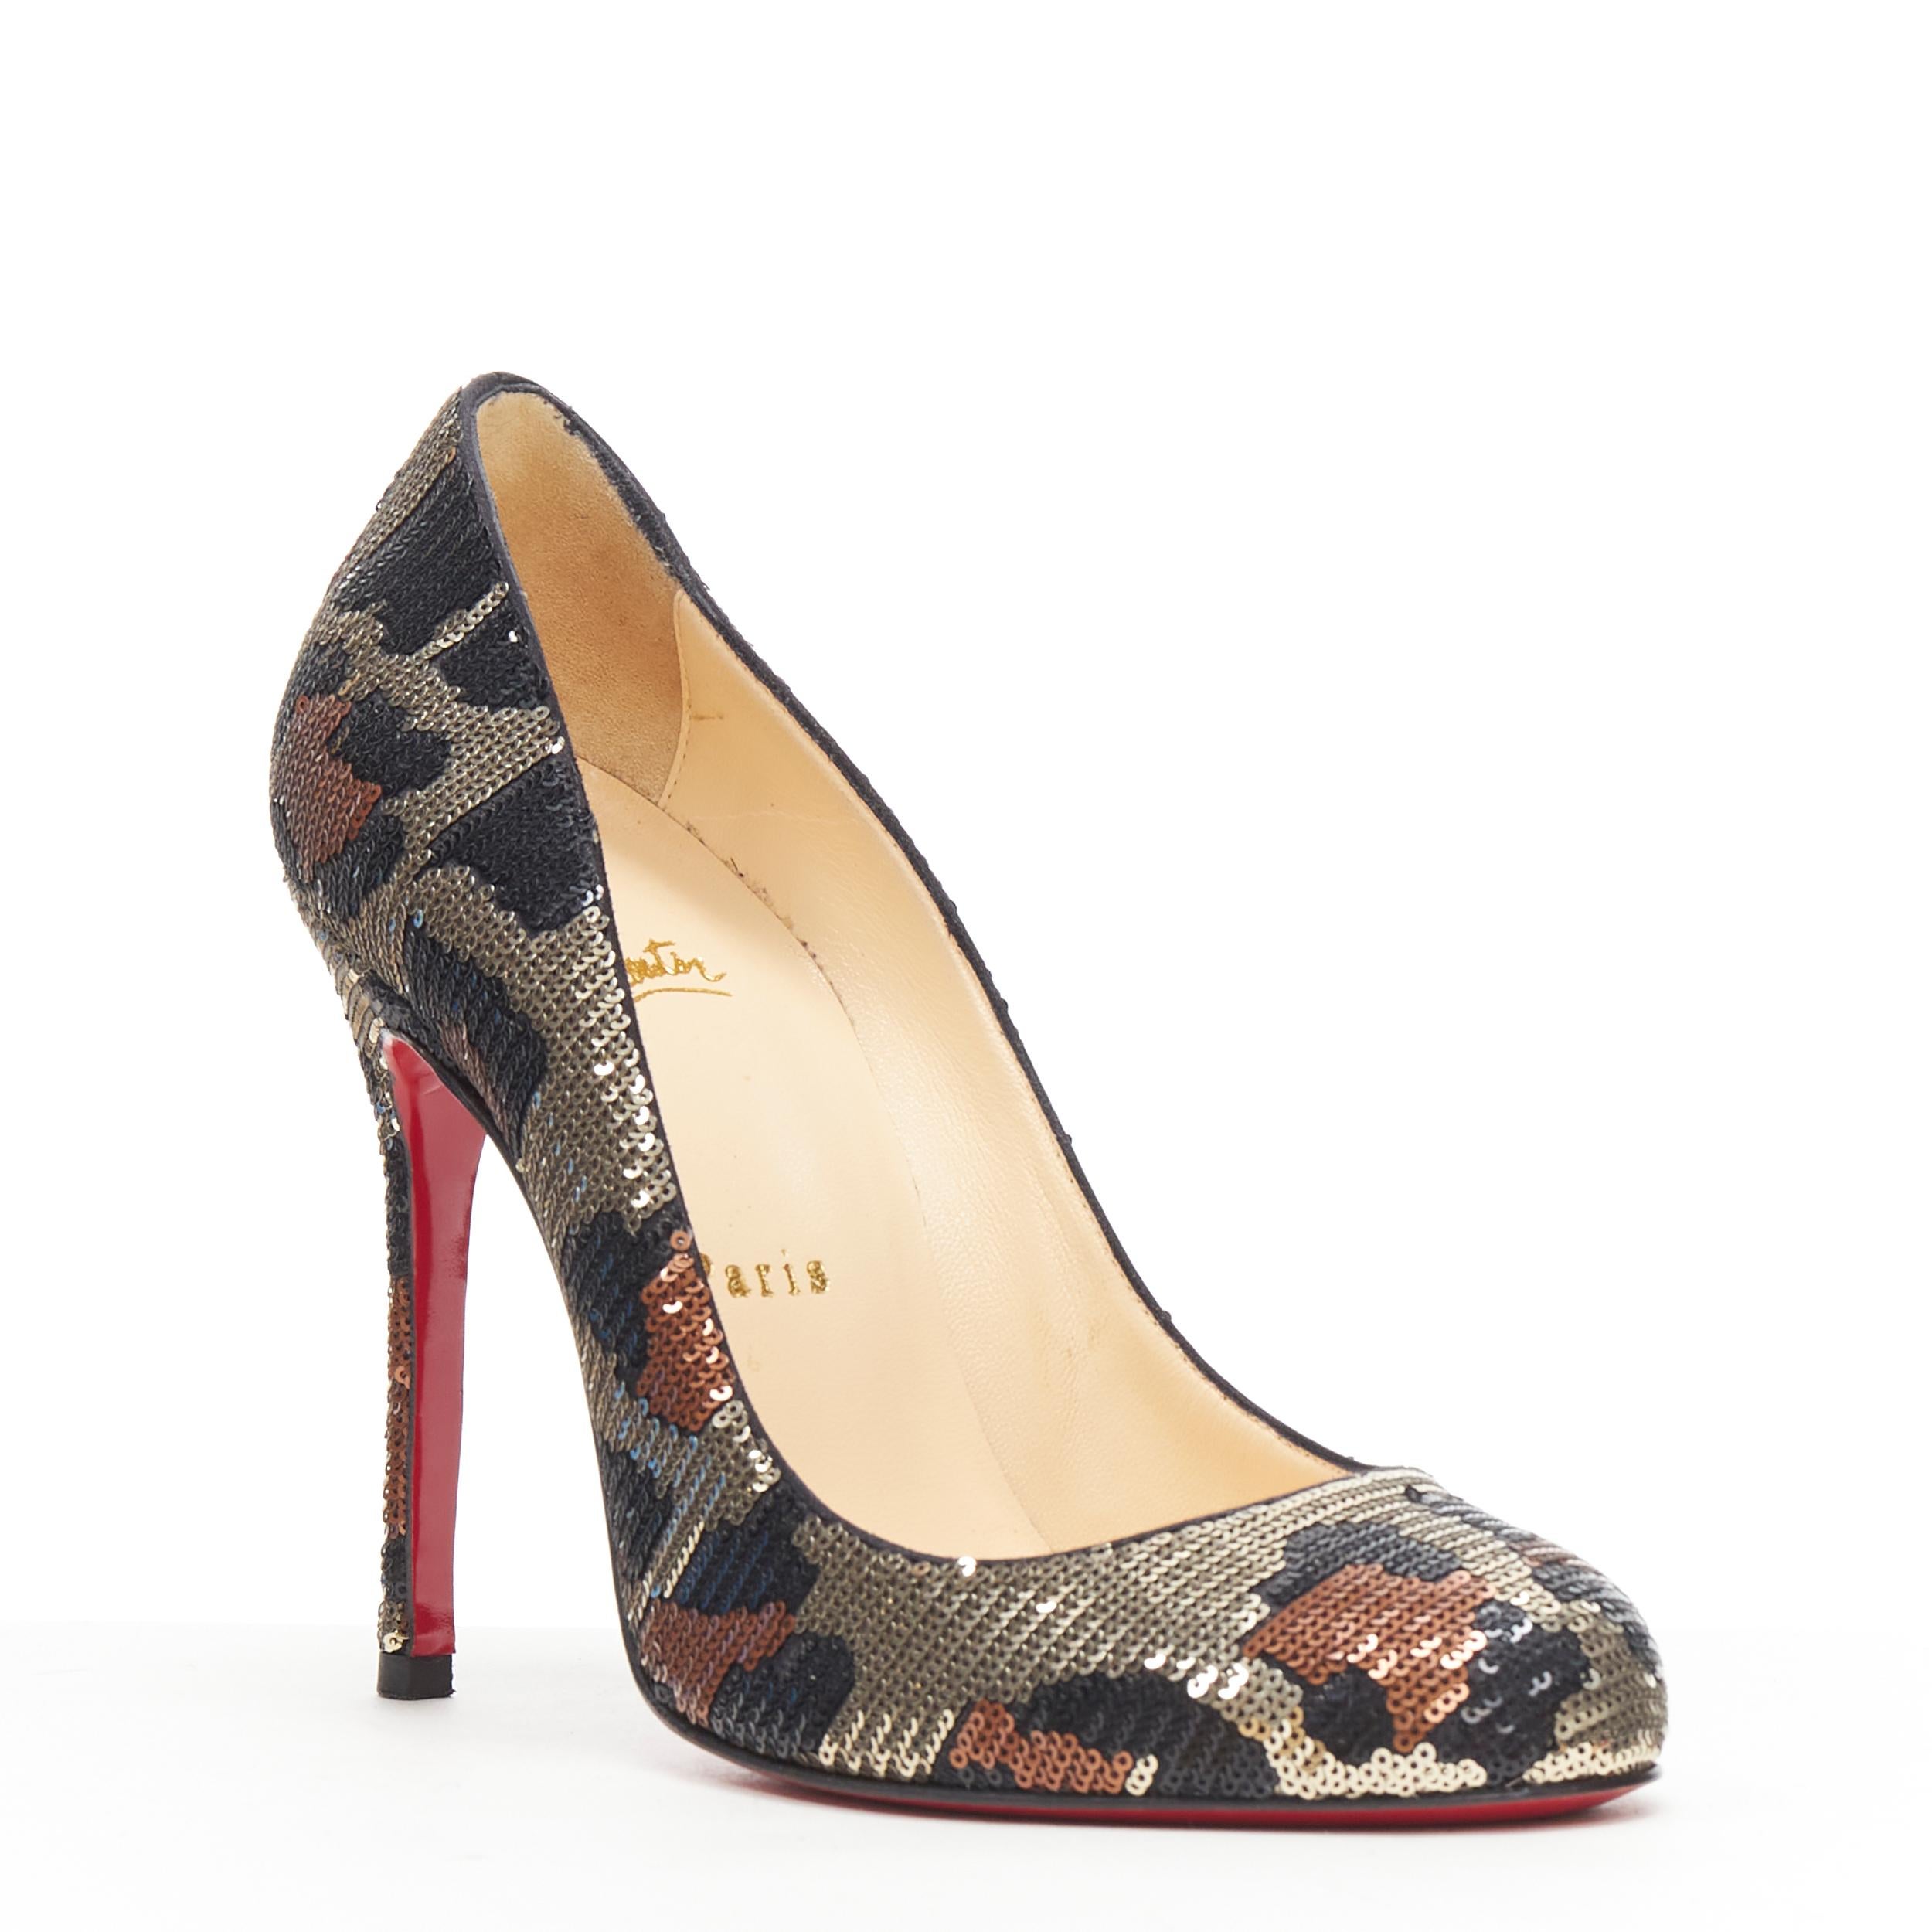 CHRISTIAN LOUBOUTIN Fifi gold leopard sequins round toe slim heel pump EU37 Reference: TGAS/B01135 
Brand: Christian Louboutin 
Designer: Christian Louboutin 
Model: Fifi Leopard 
Material: Leather 
Color: Brown 
Pattern: Leopard 
Extra Detail: